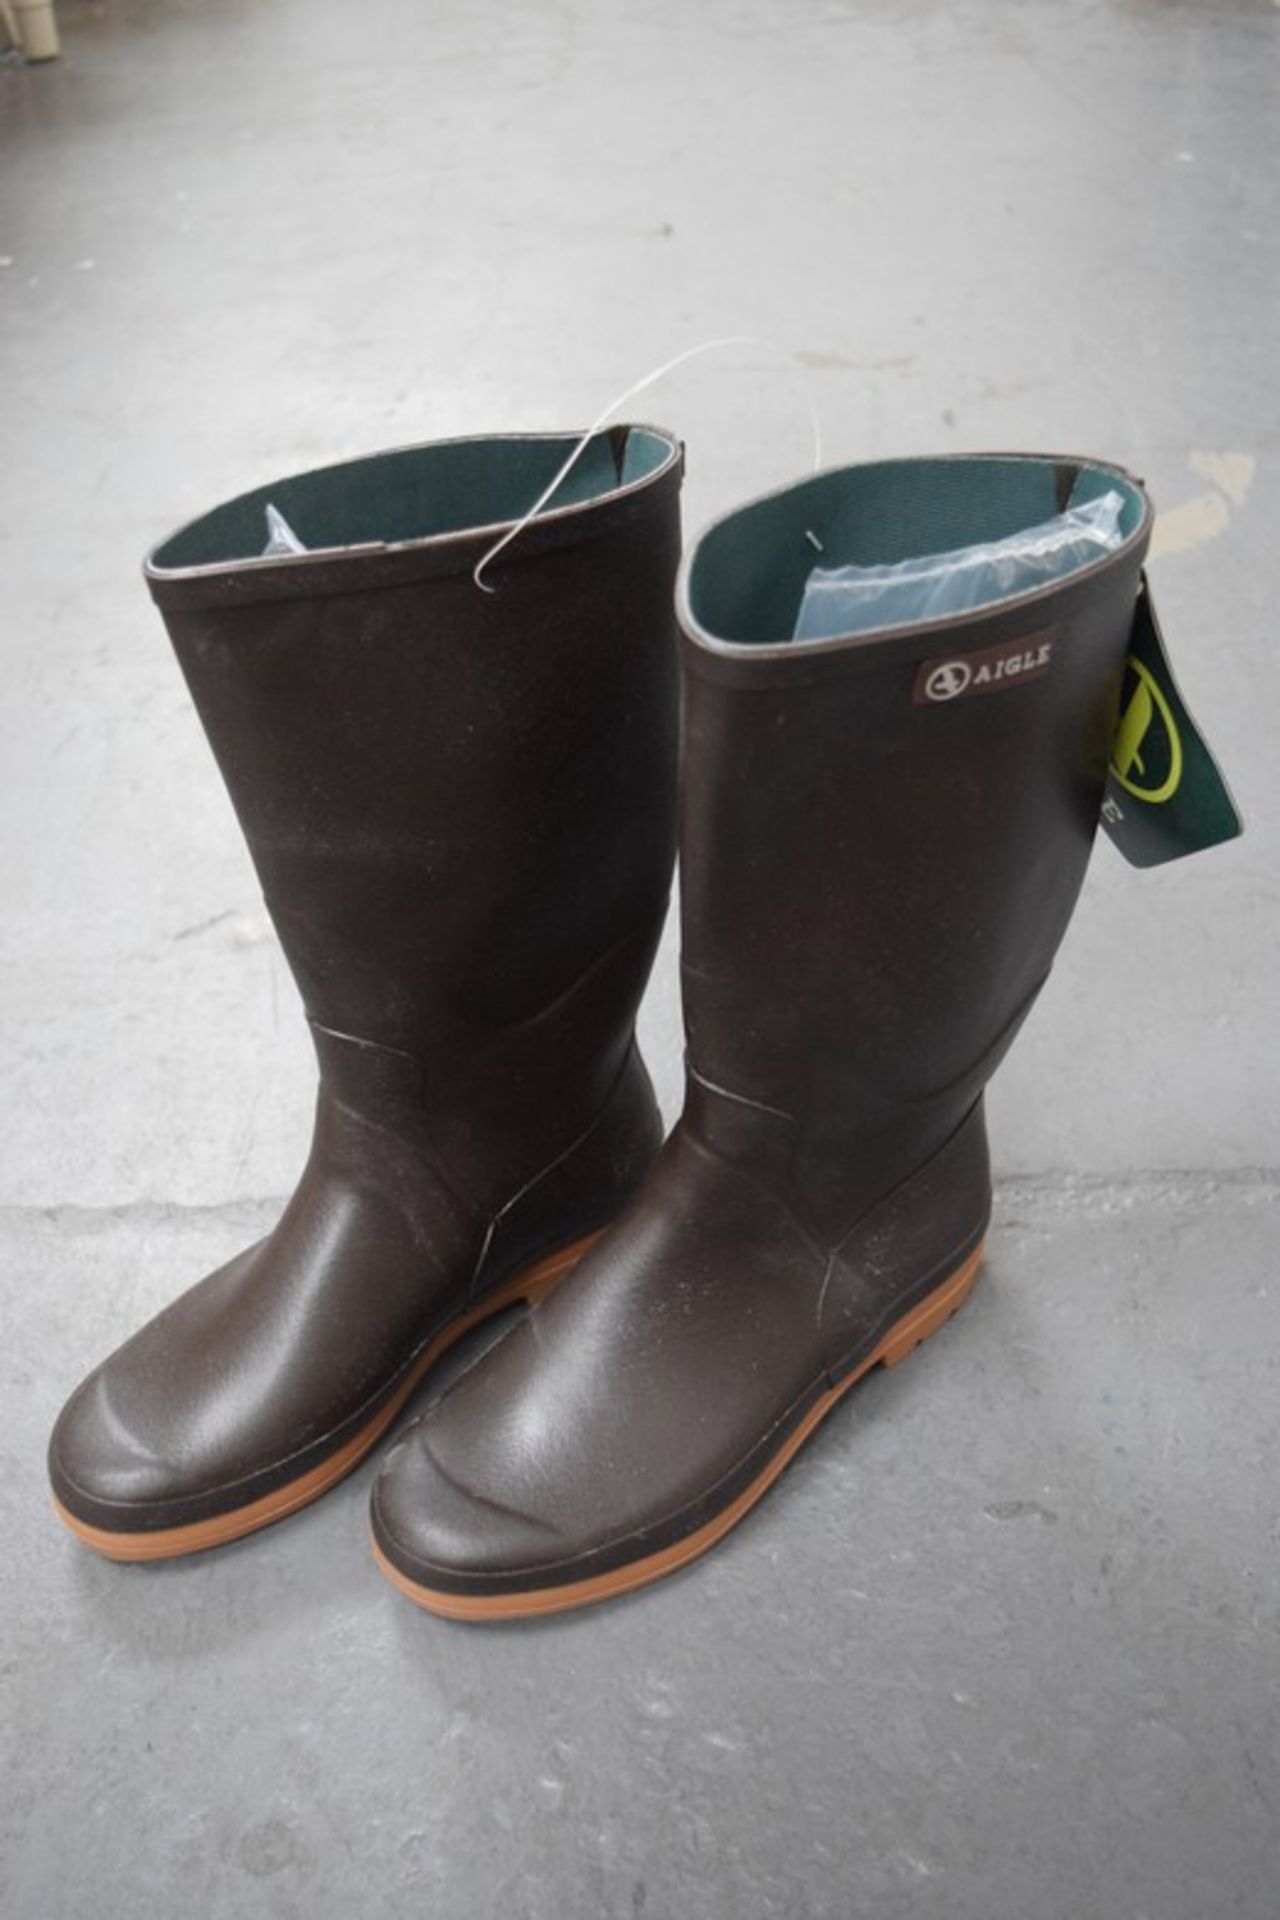 1 X PAIR AIGLE WELLINGTON BOOTS IN BROWN SIZE 40 RRP £100